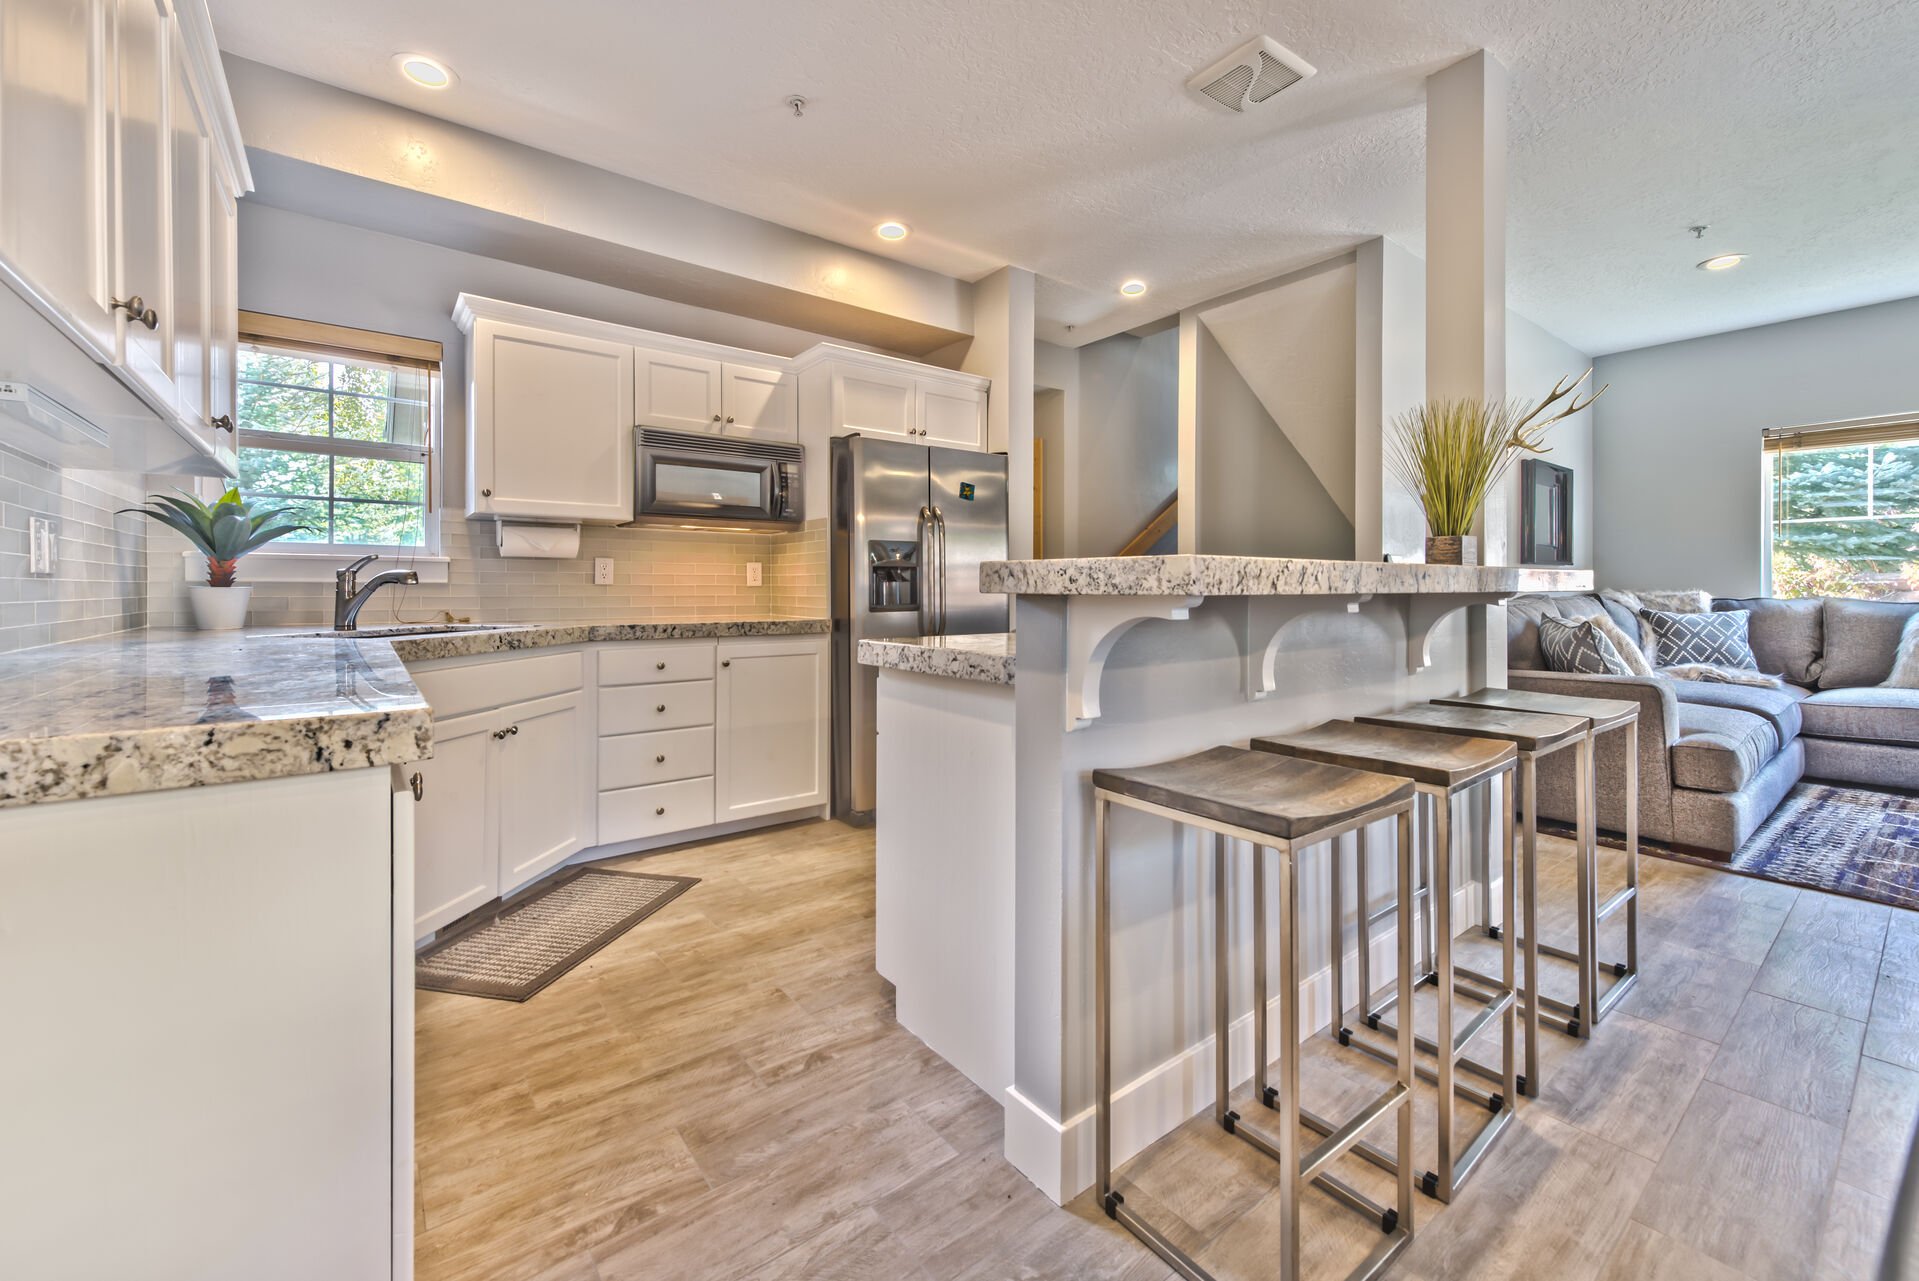 Fully Equipped Kitchen with High-end Finishes, Stainless Steel Appliances, a 5-Burner Gas Range and Bar Seating for 4